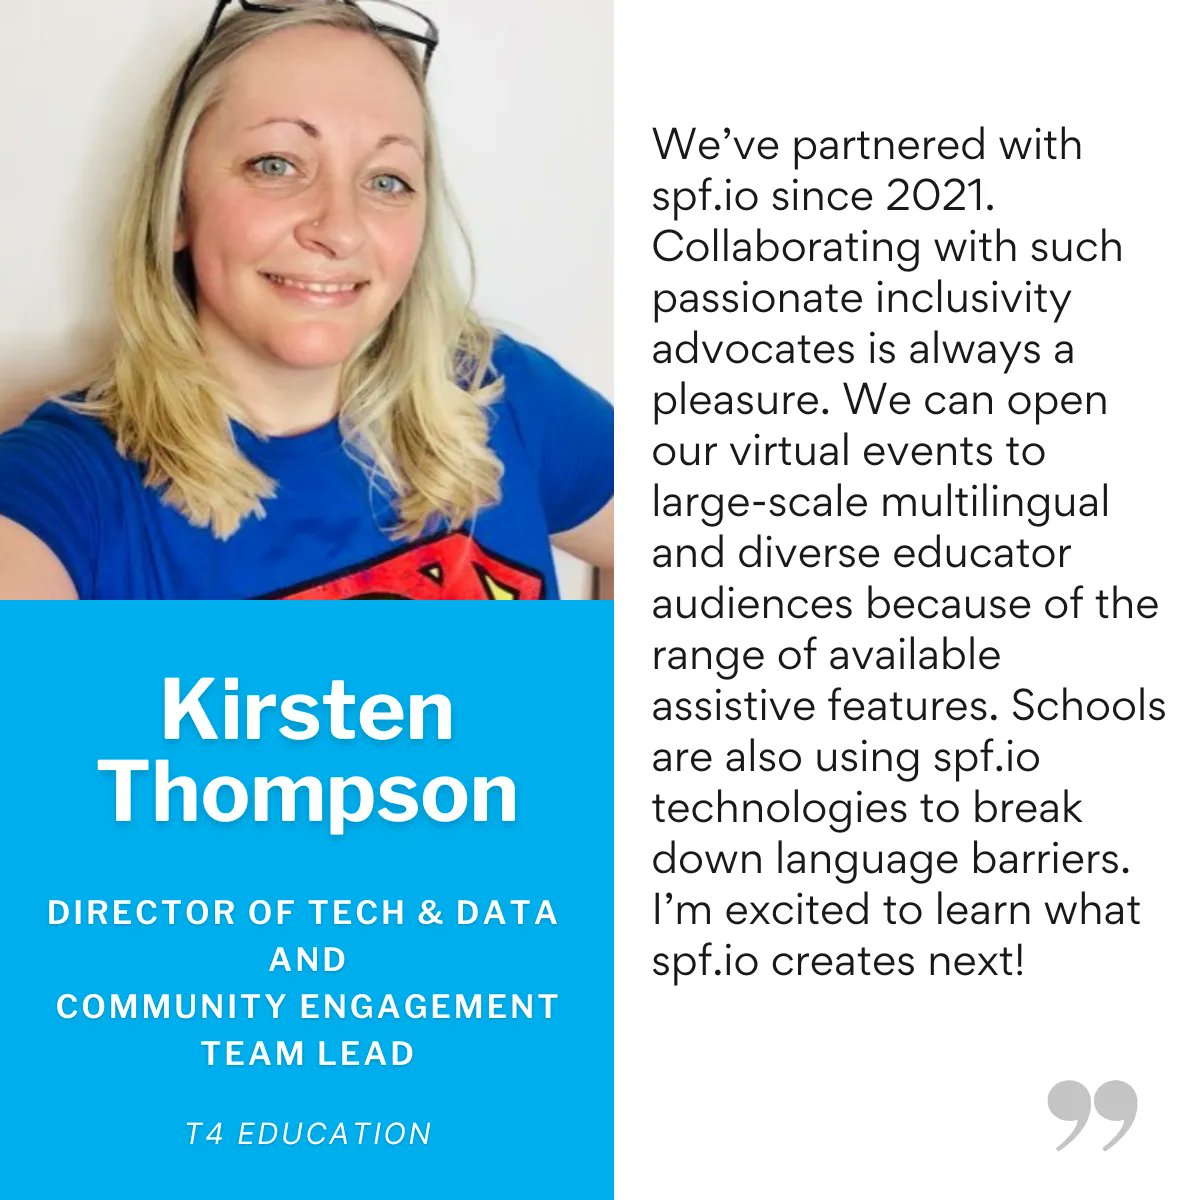 The #TeacherTechSummit was a great opportunity to facilitate a learning experience in various languages for #teachers committed to improving education through technology.
Thank you @iamKirstenT from @T4EduC for your kind words! #EdTech #InclusiveEducation #LanguageAccess